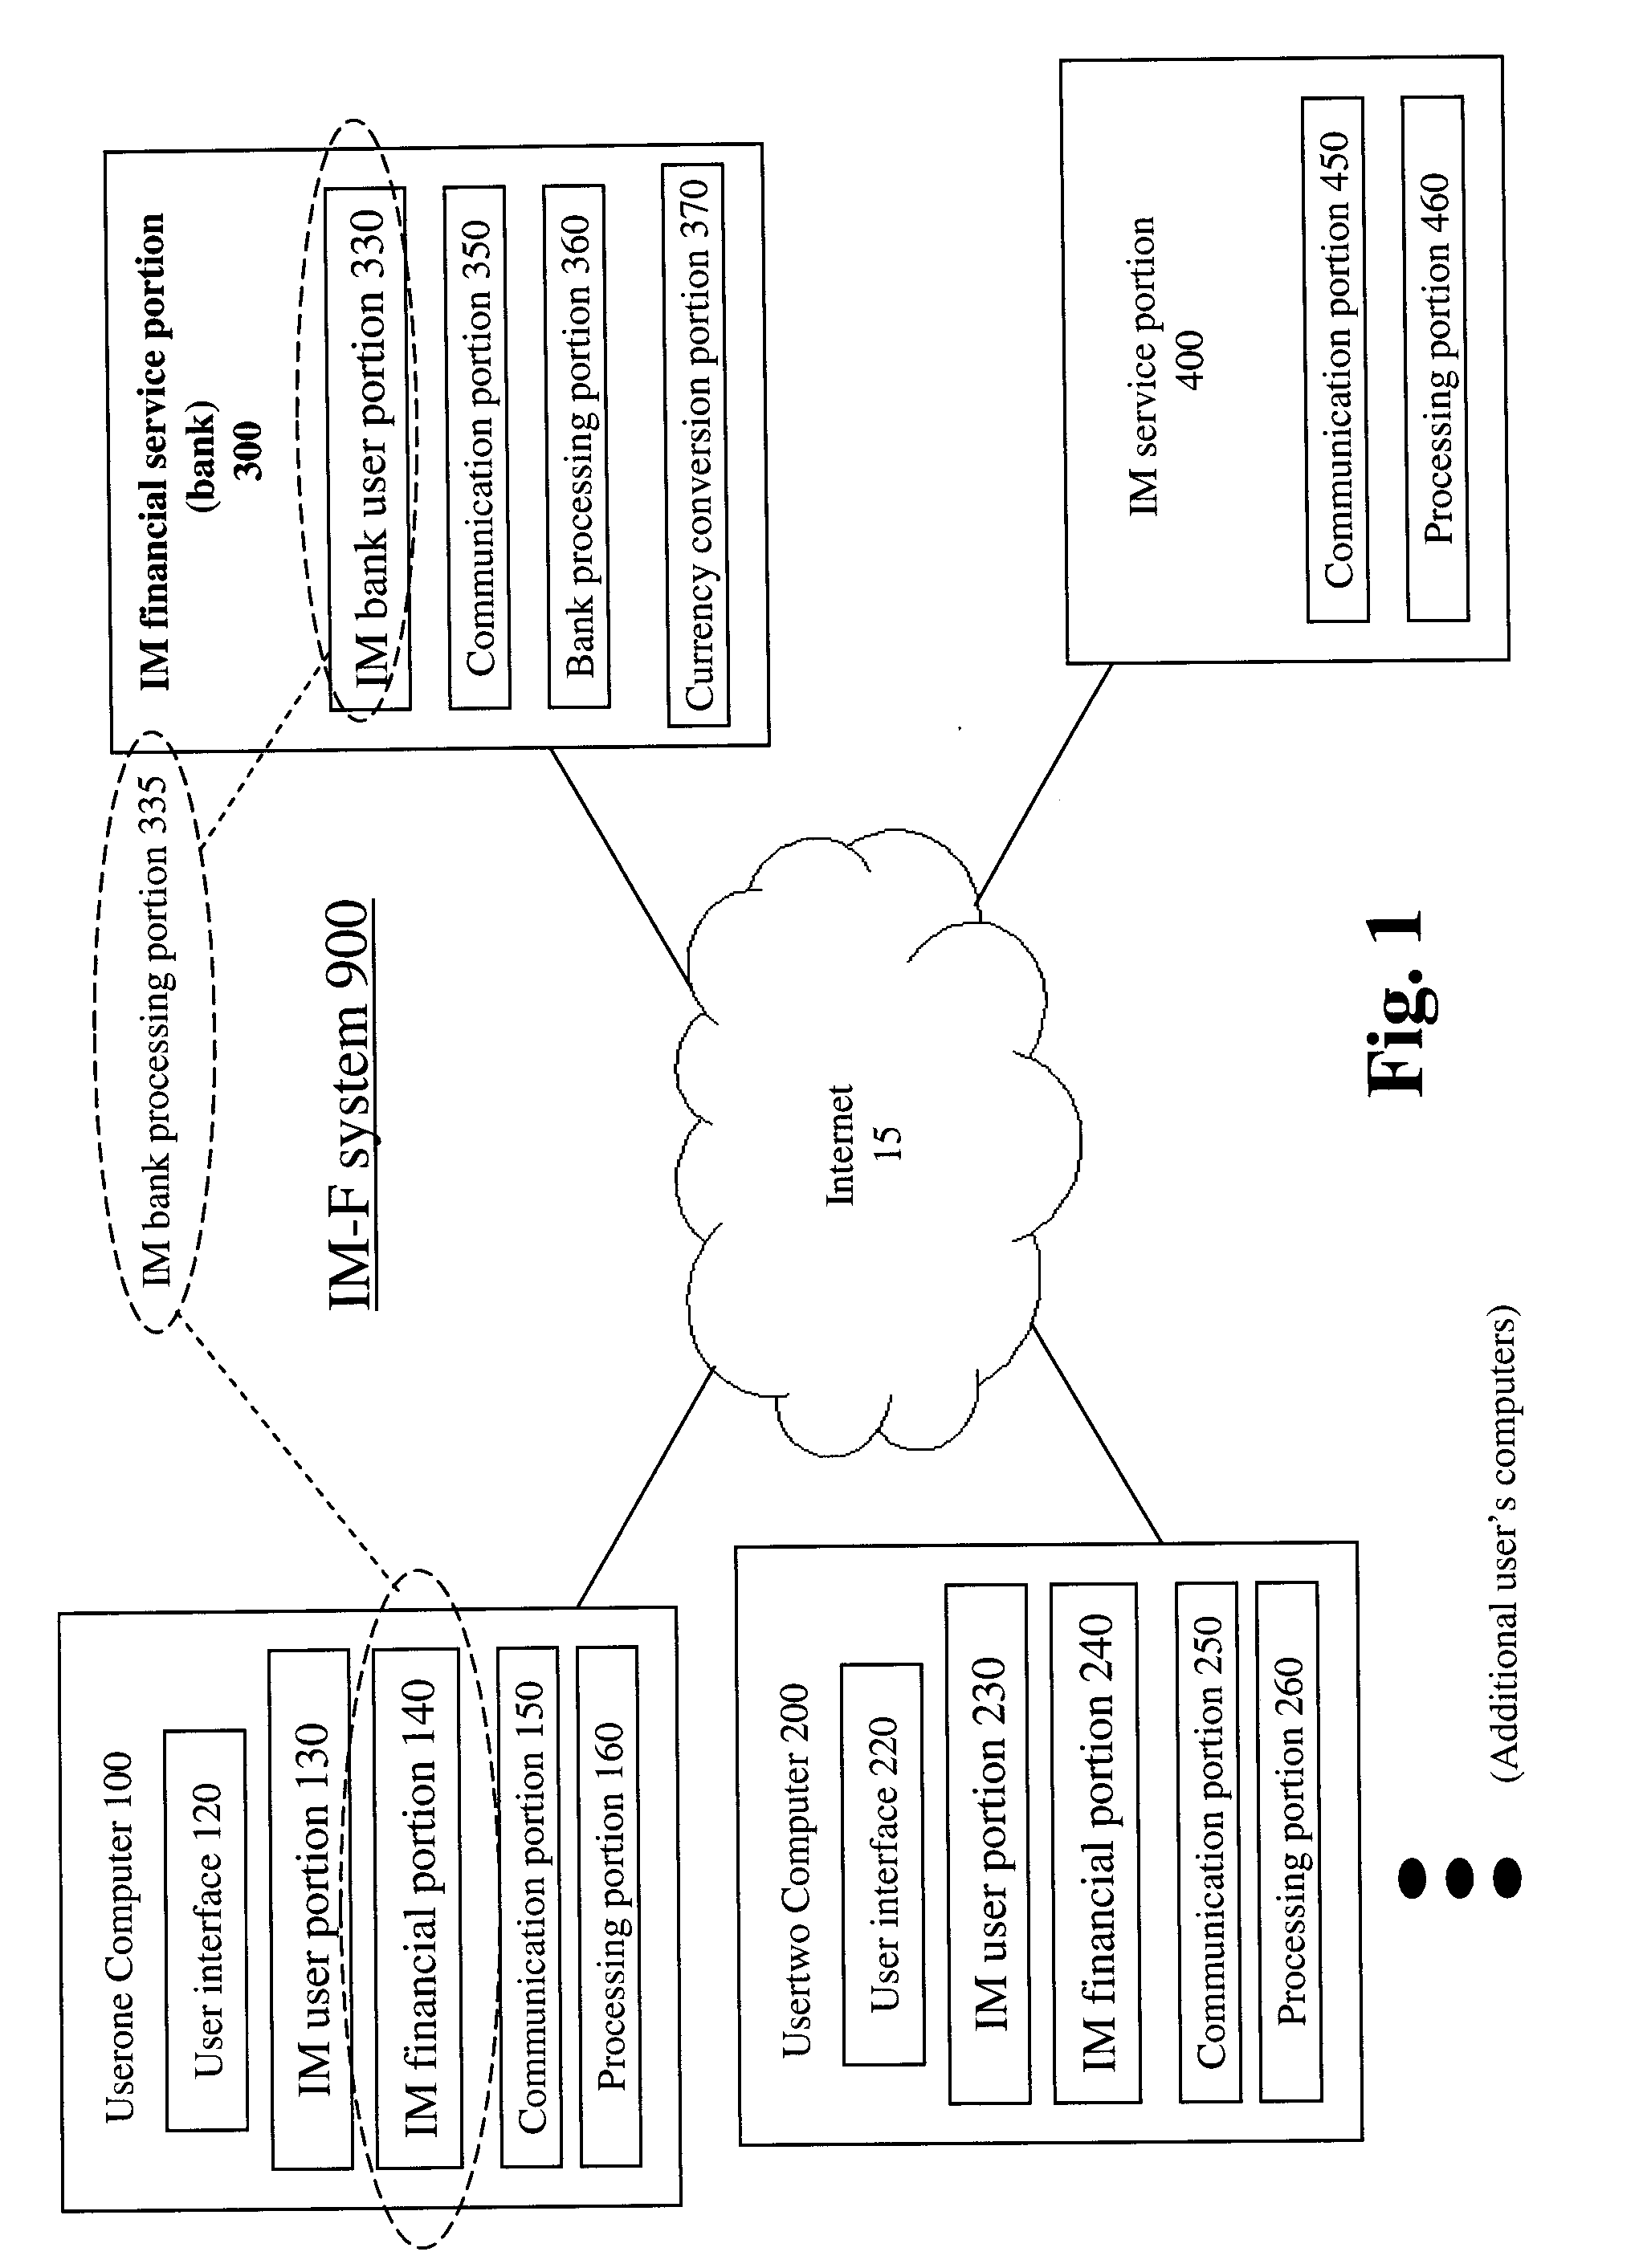 Systems and methods for providing financial processing in conjunction with instant messaging and other communications